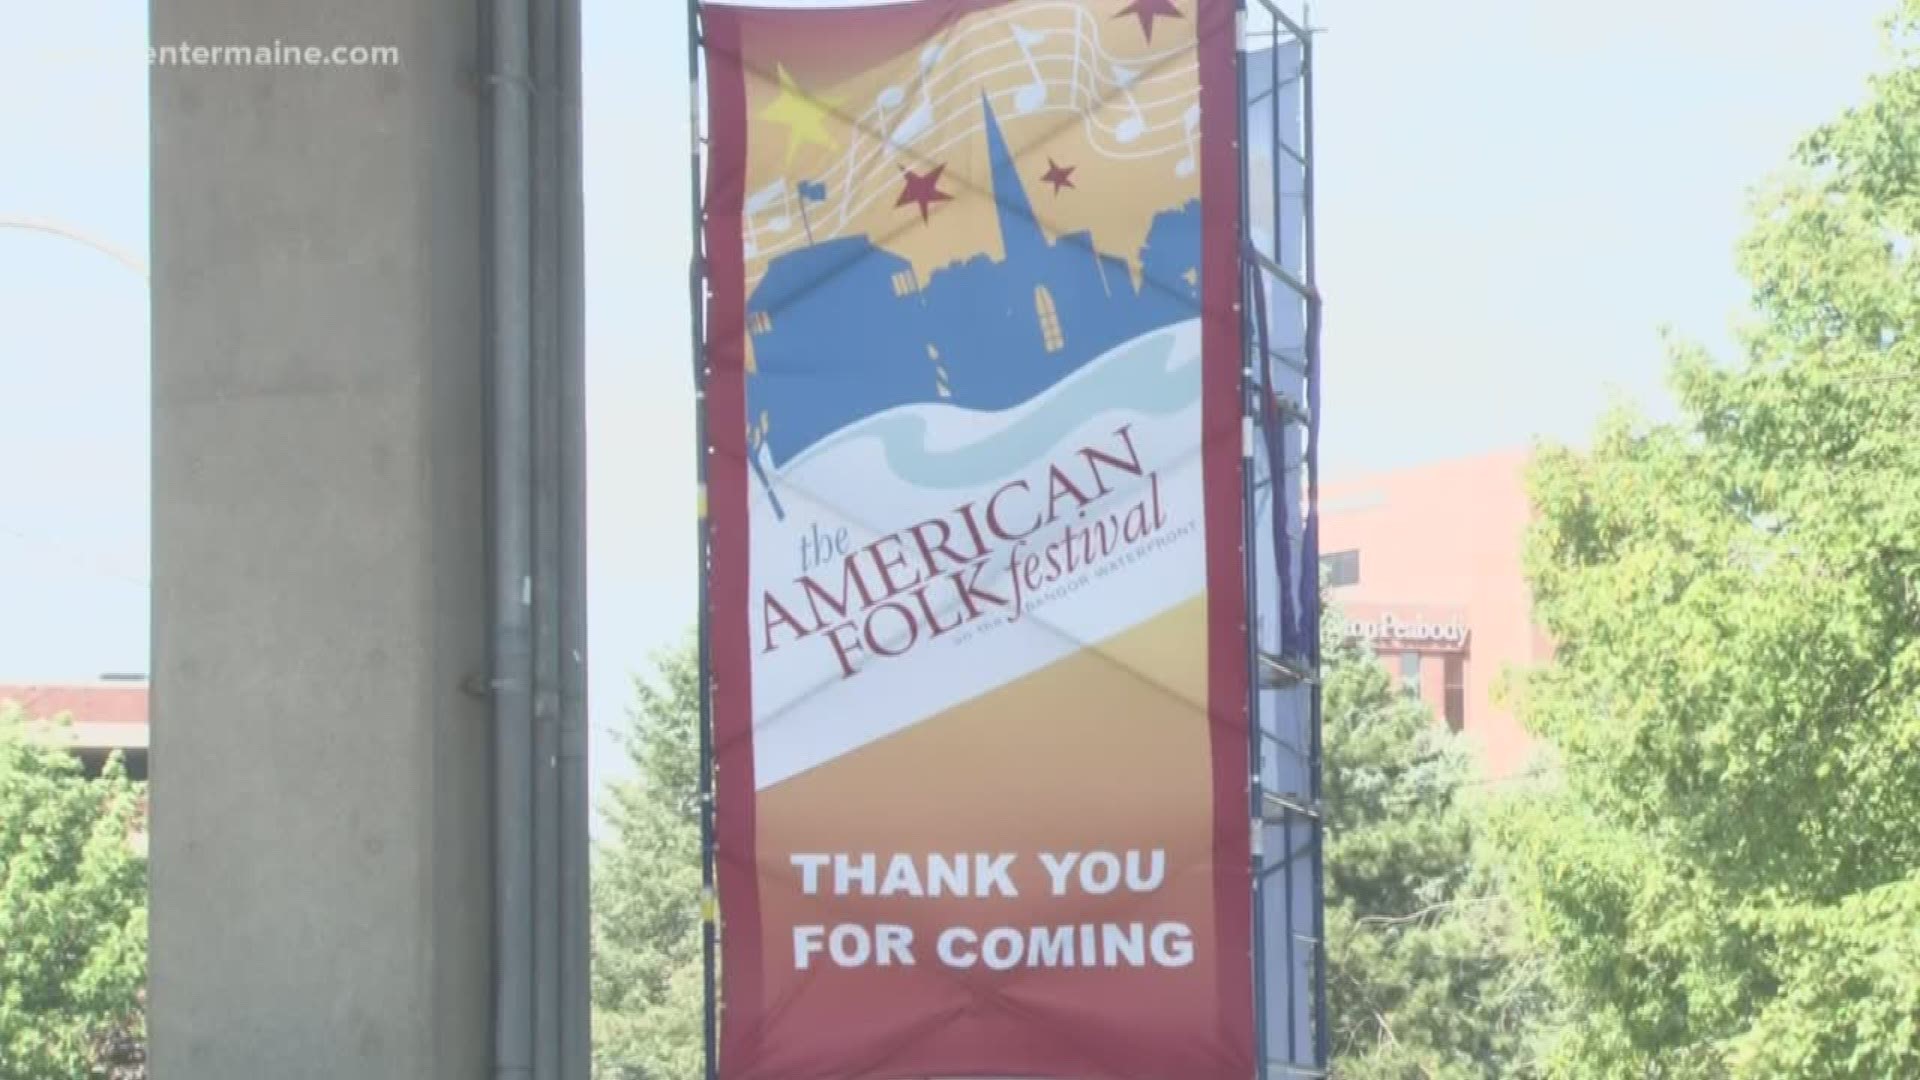 After 18 years, organizers of the American Folk Festival say they have decided to end the festival and dissolve the organization.